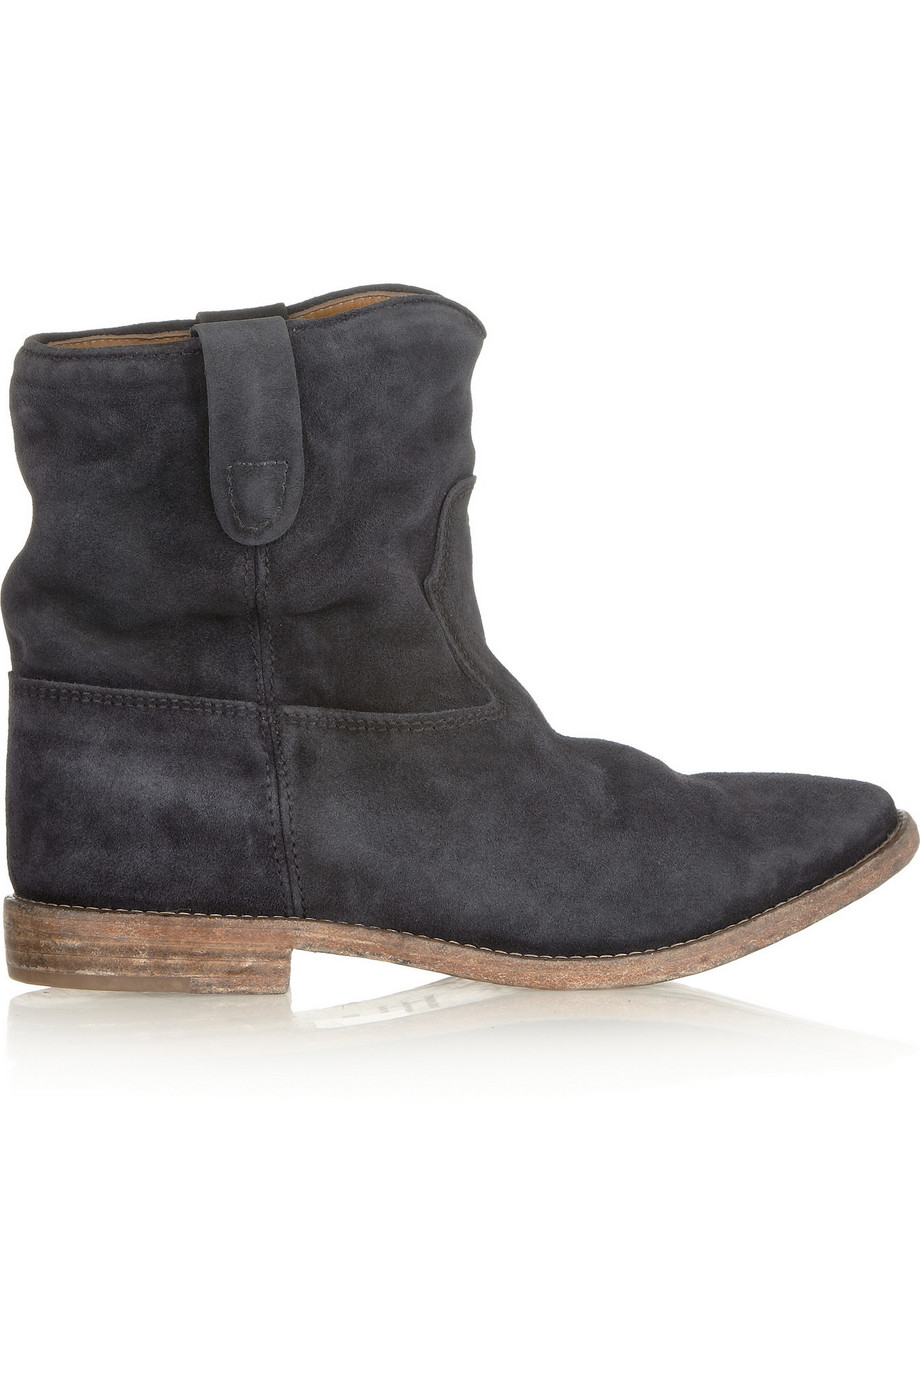 Isabel Marant Crisi Ankle Boots in Faded-Anthracite Suede.jpg